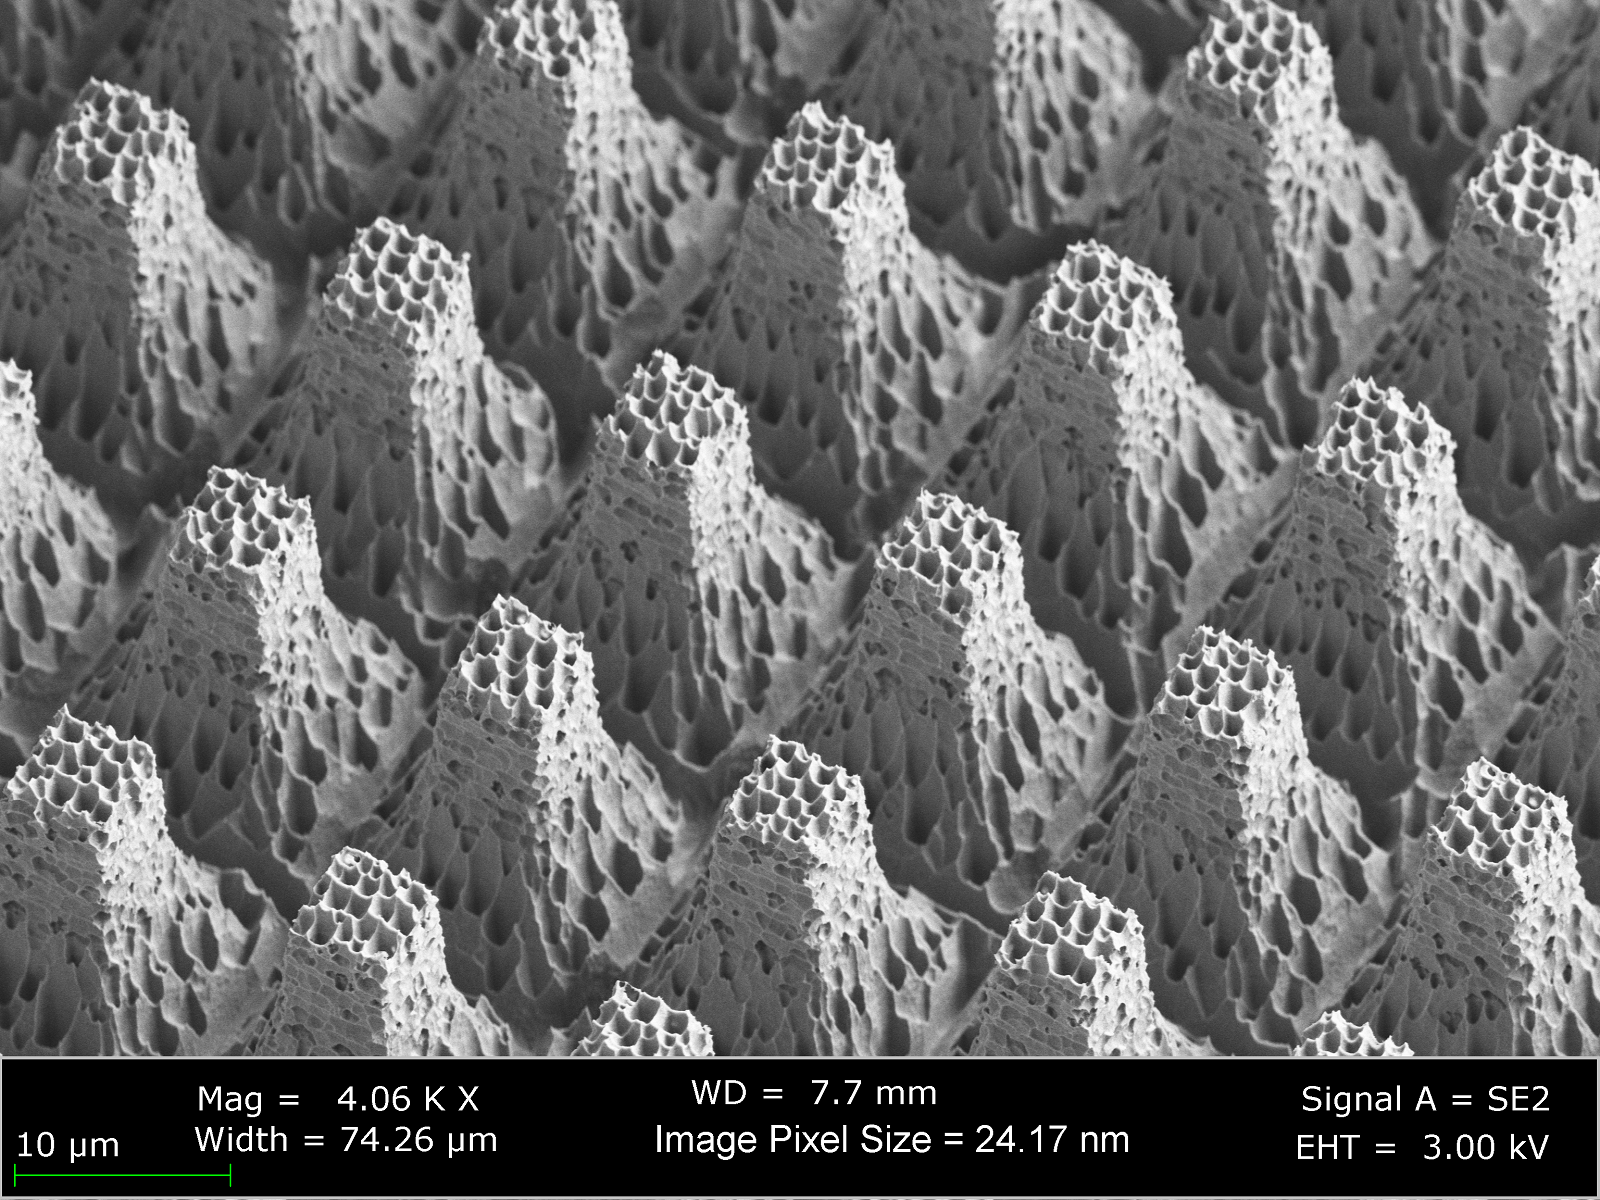 A side-view image capturing details of one of the superhydrophobic surfaces used in this study. The superhydrophobic texture has multiple length scales and is composed of micro-scale post features and nano-scale nanograss features.  Image courtesy of Dr. Kripa 